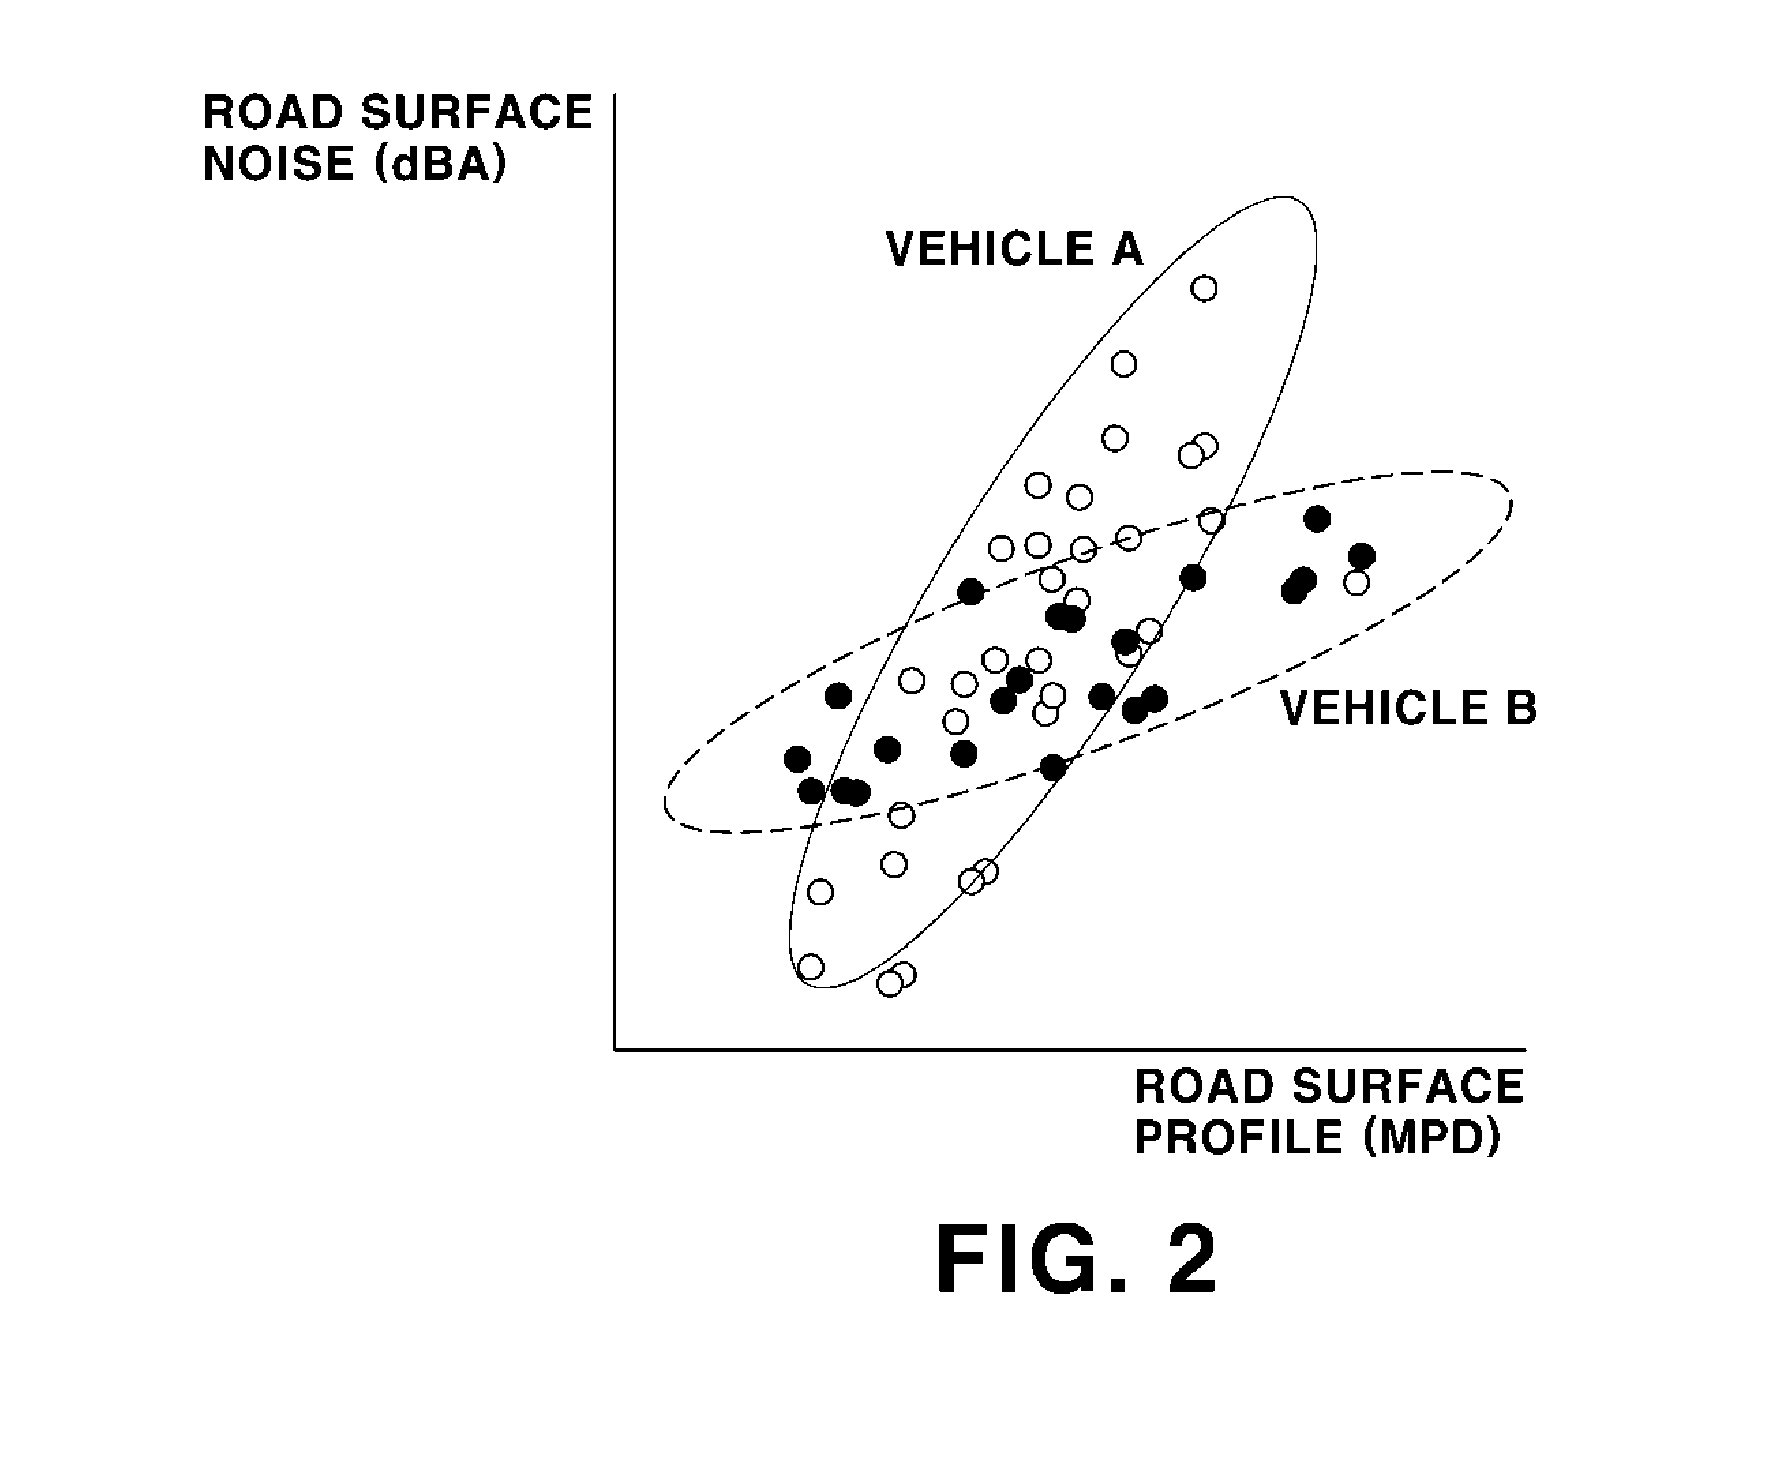 System and method for quantifying correlation between road surface profile and road noise